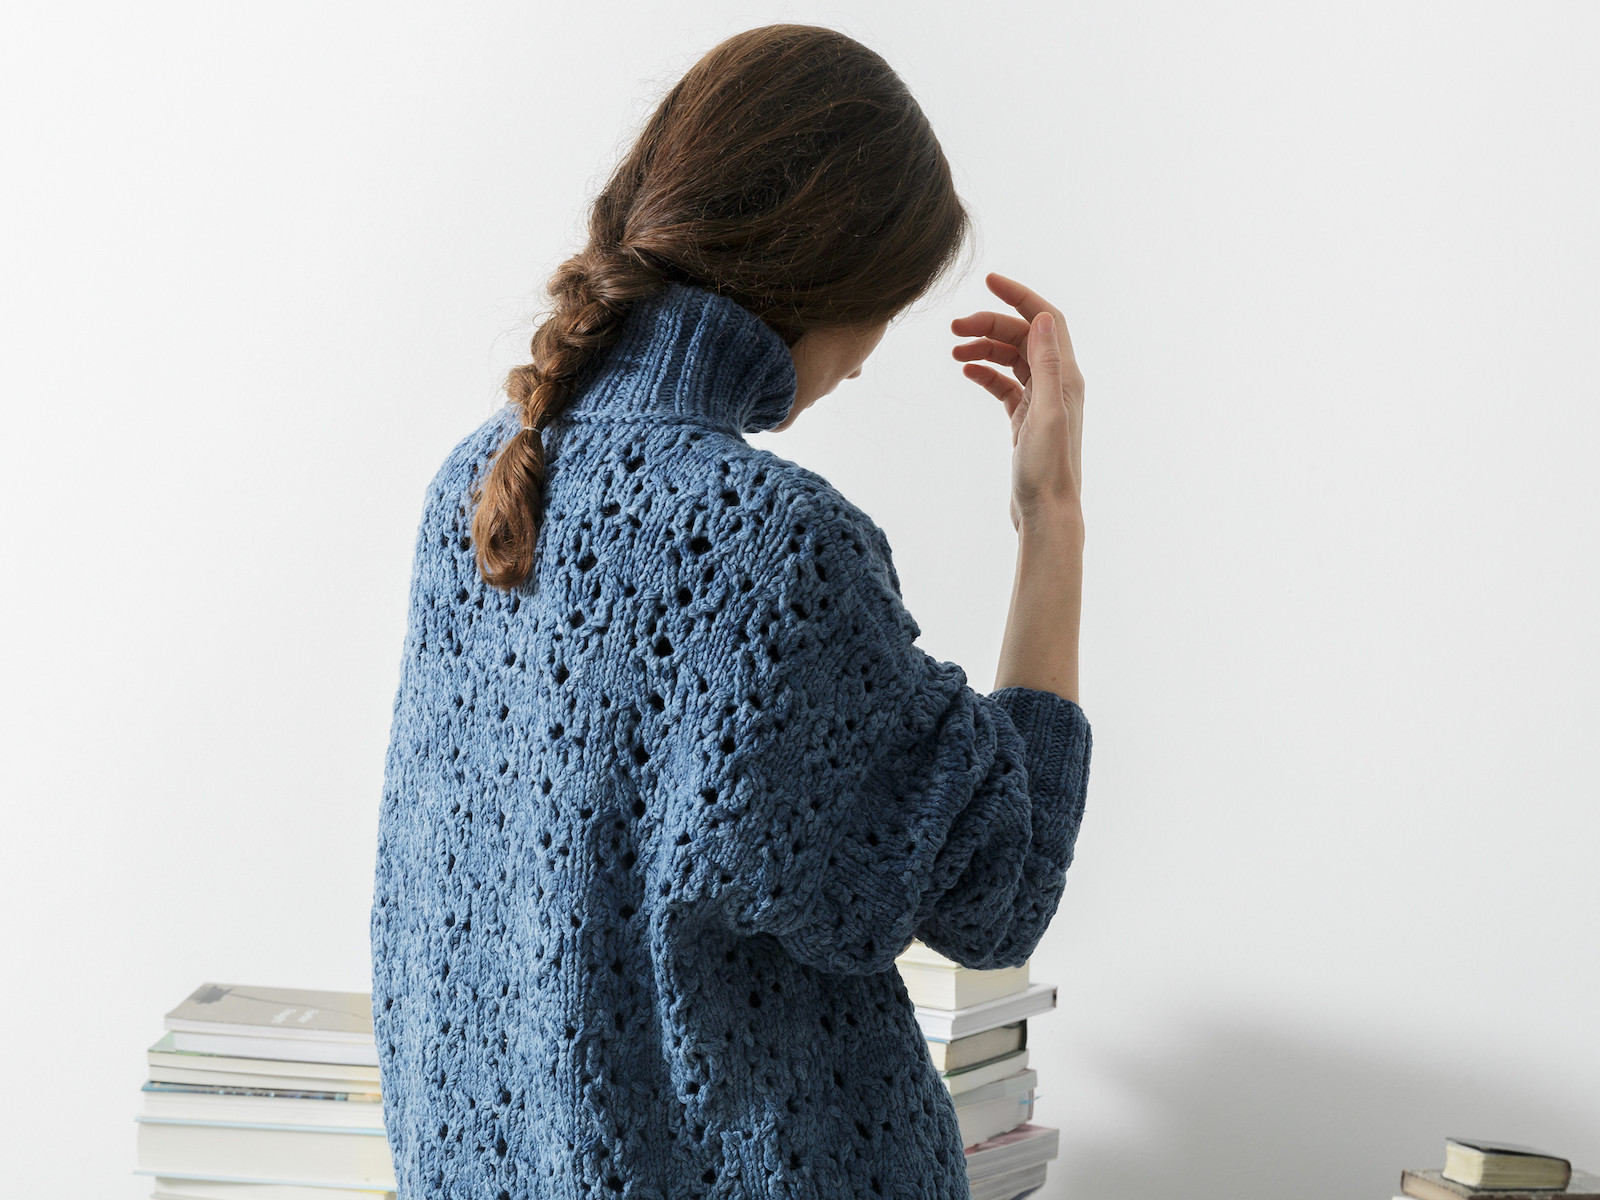 High-neck lacy sweater Image